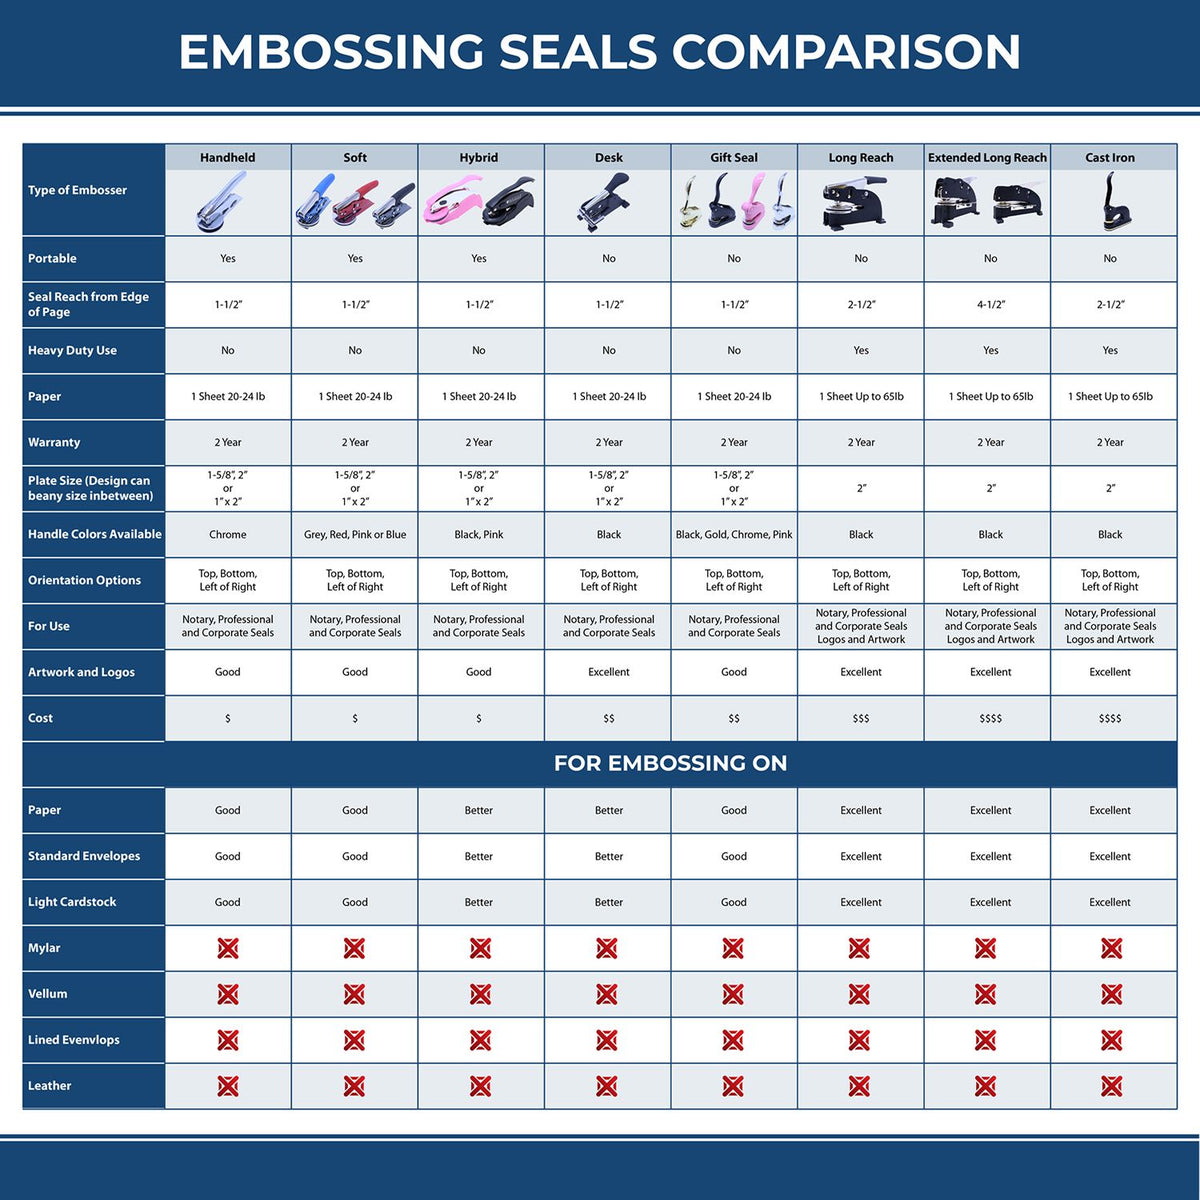 A comparison chart for the different types of mount models available for the Heavy Duty Cast Iron Colorado Land Surveyor Seal Embosser.